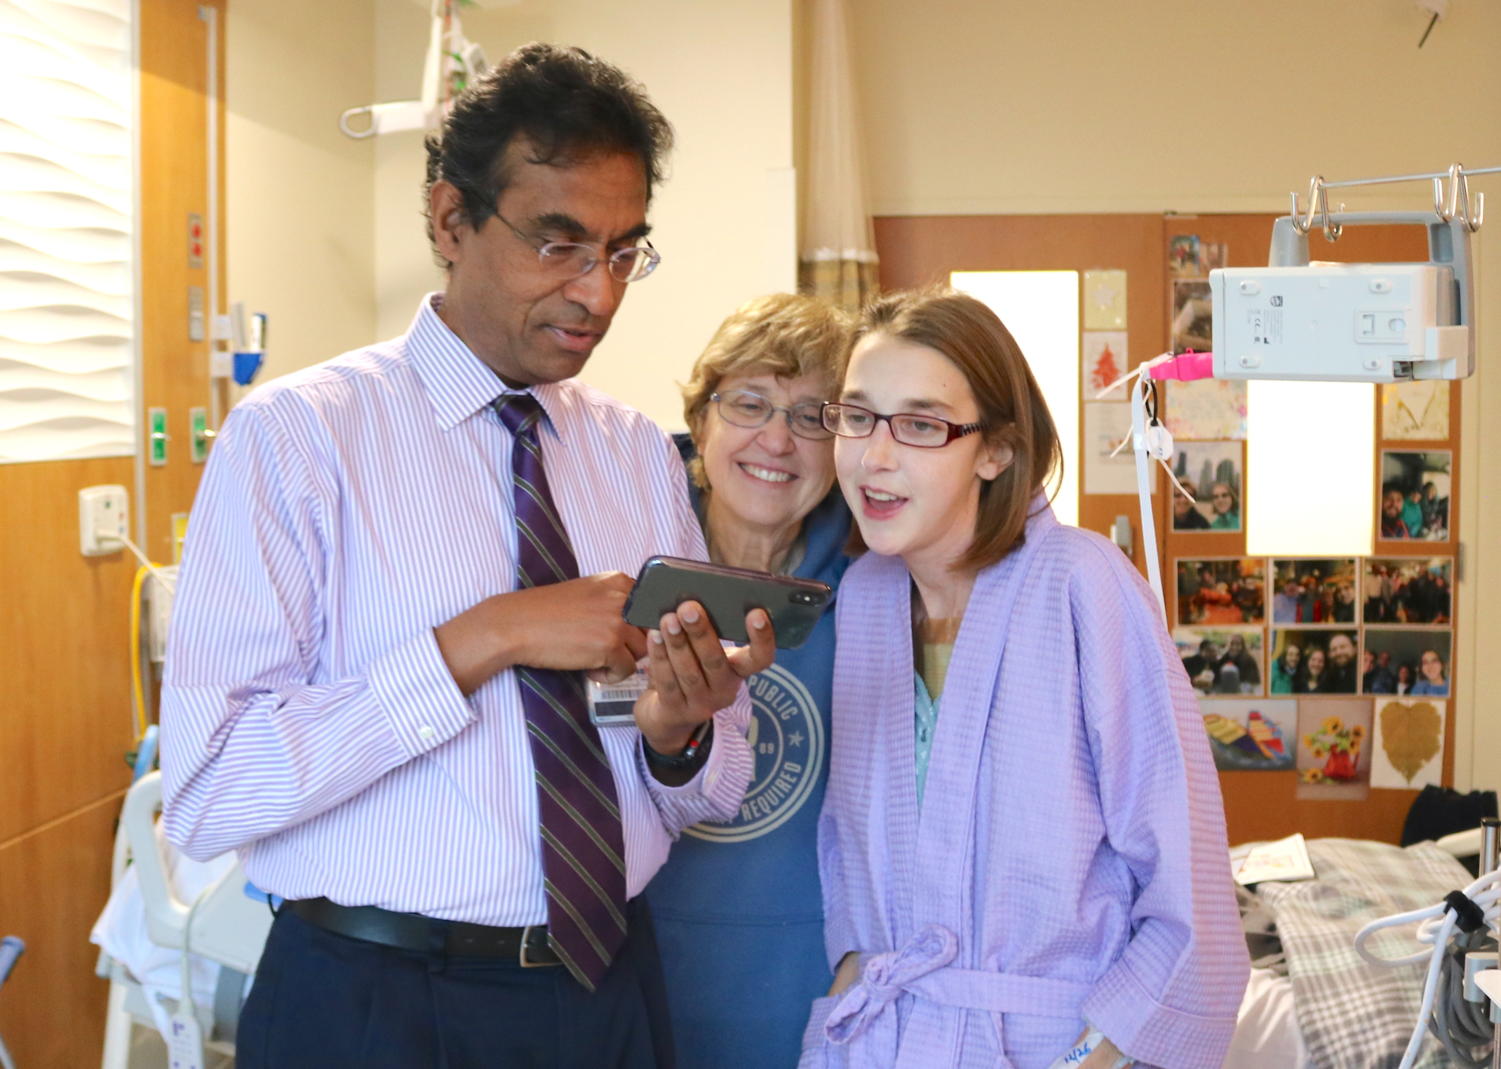 Valluvan Jeevanandam, MD, one of the physicians involved with the surgery, with Sarah McPharlin and her mother.